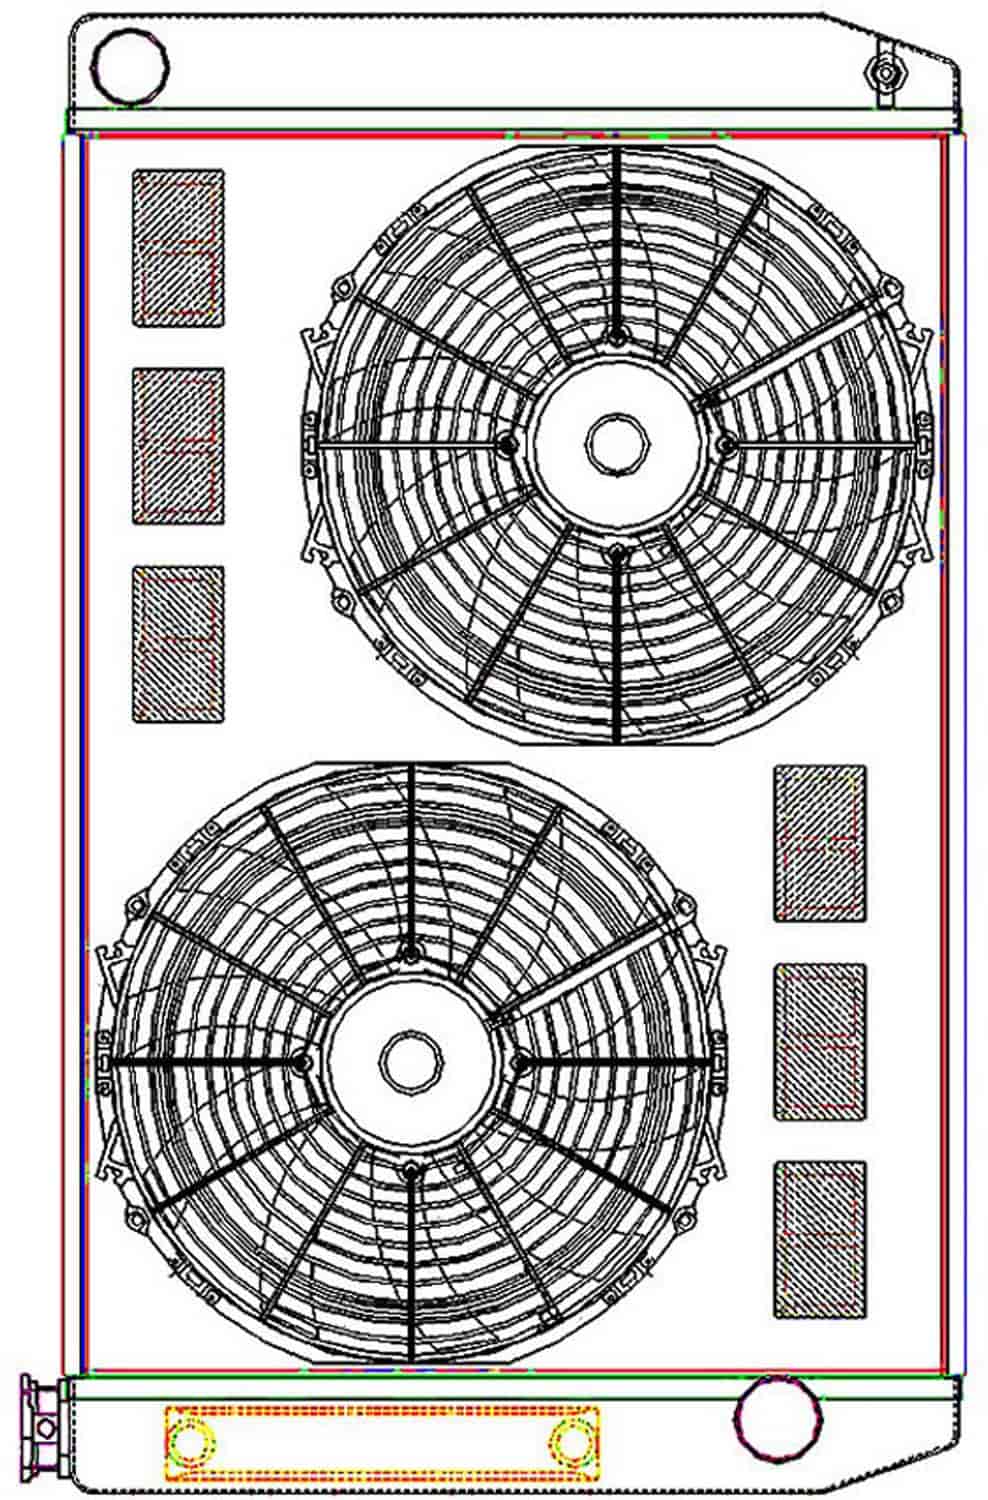 ClassicCool ComboUnit Universal Fit Radiator and Fan Single Pass Crossflow Design 31" x 19" with Transmission Cooler